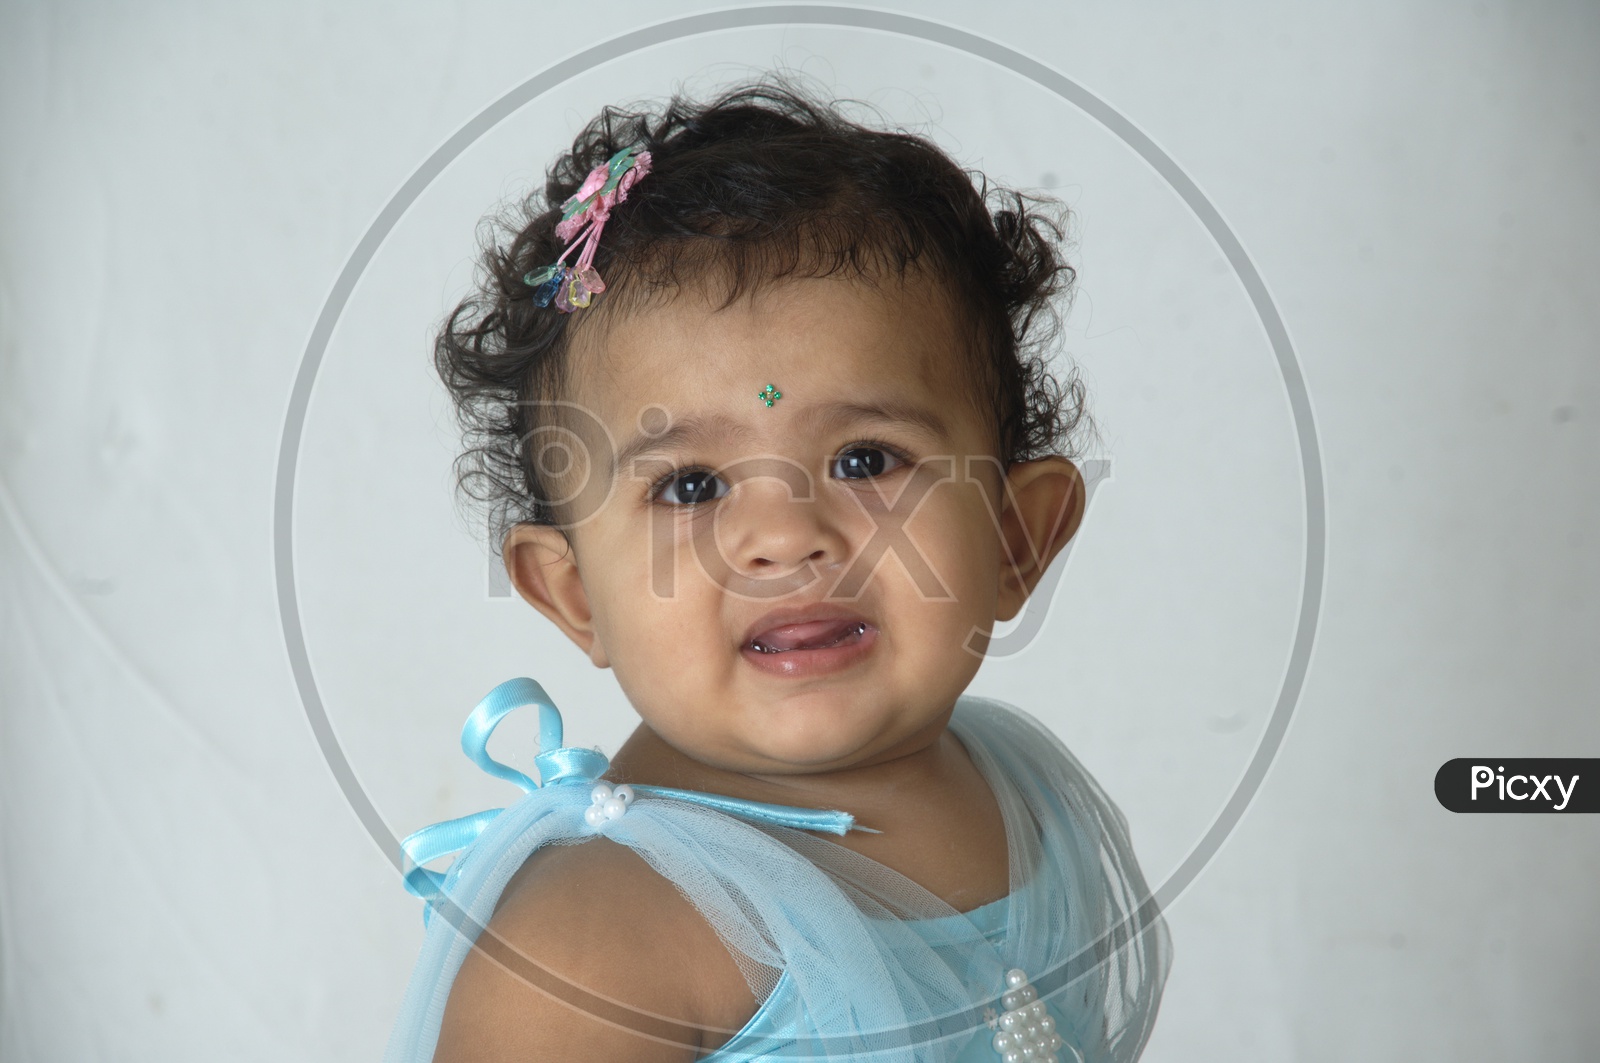 Indian Girl  Child Closeup Shot With Expressions over an Isolated White Background